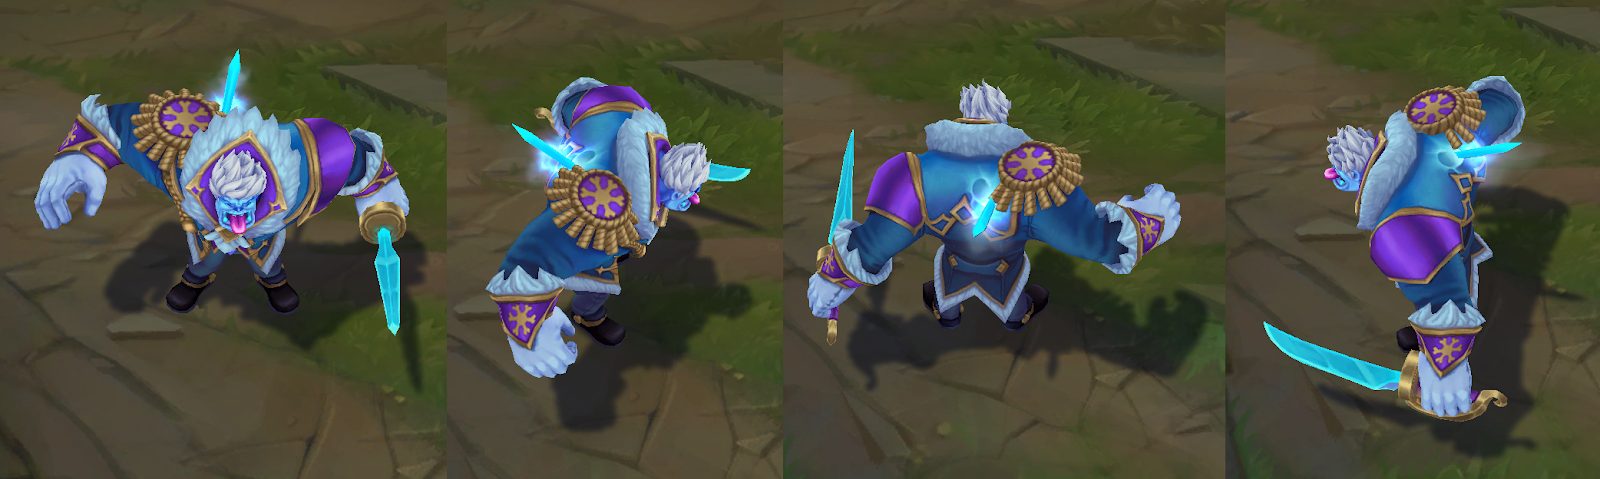 frozen prince mundo skin for league of legends ingame picture